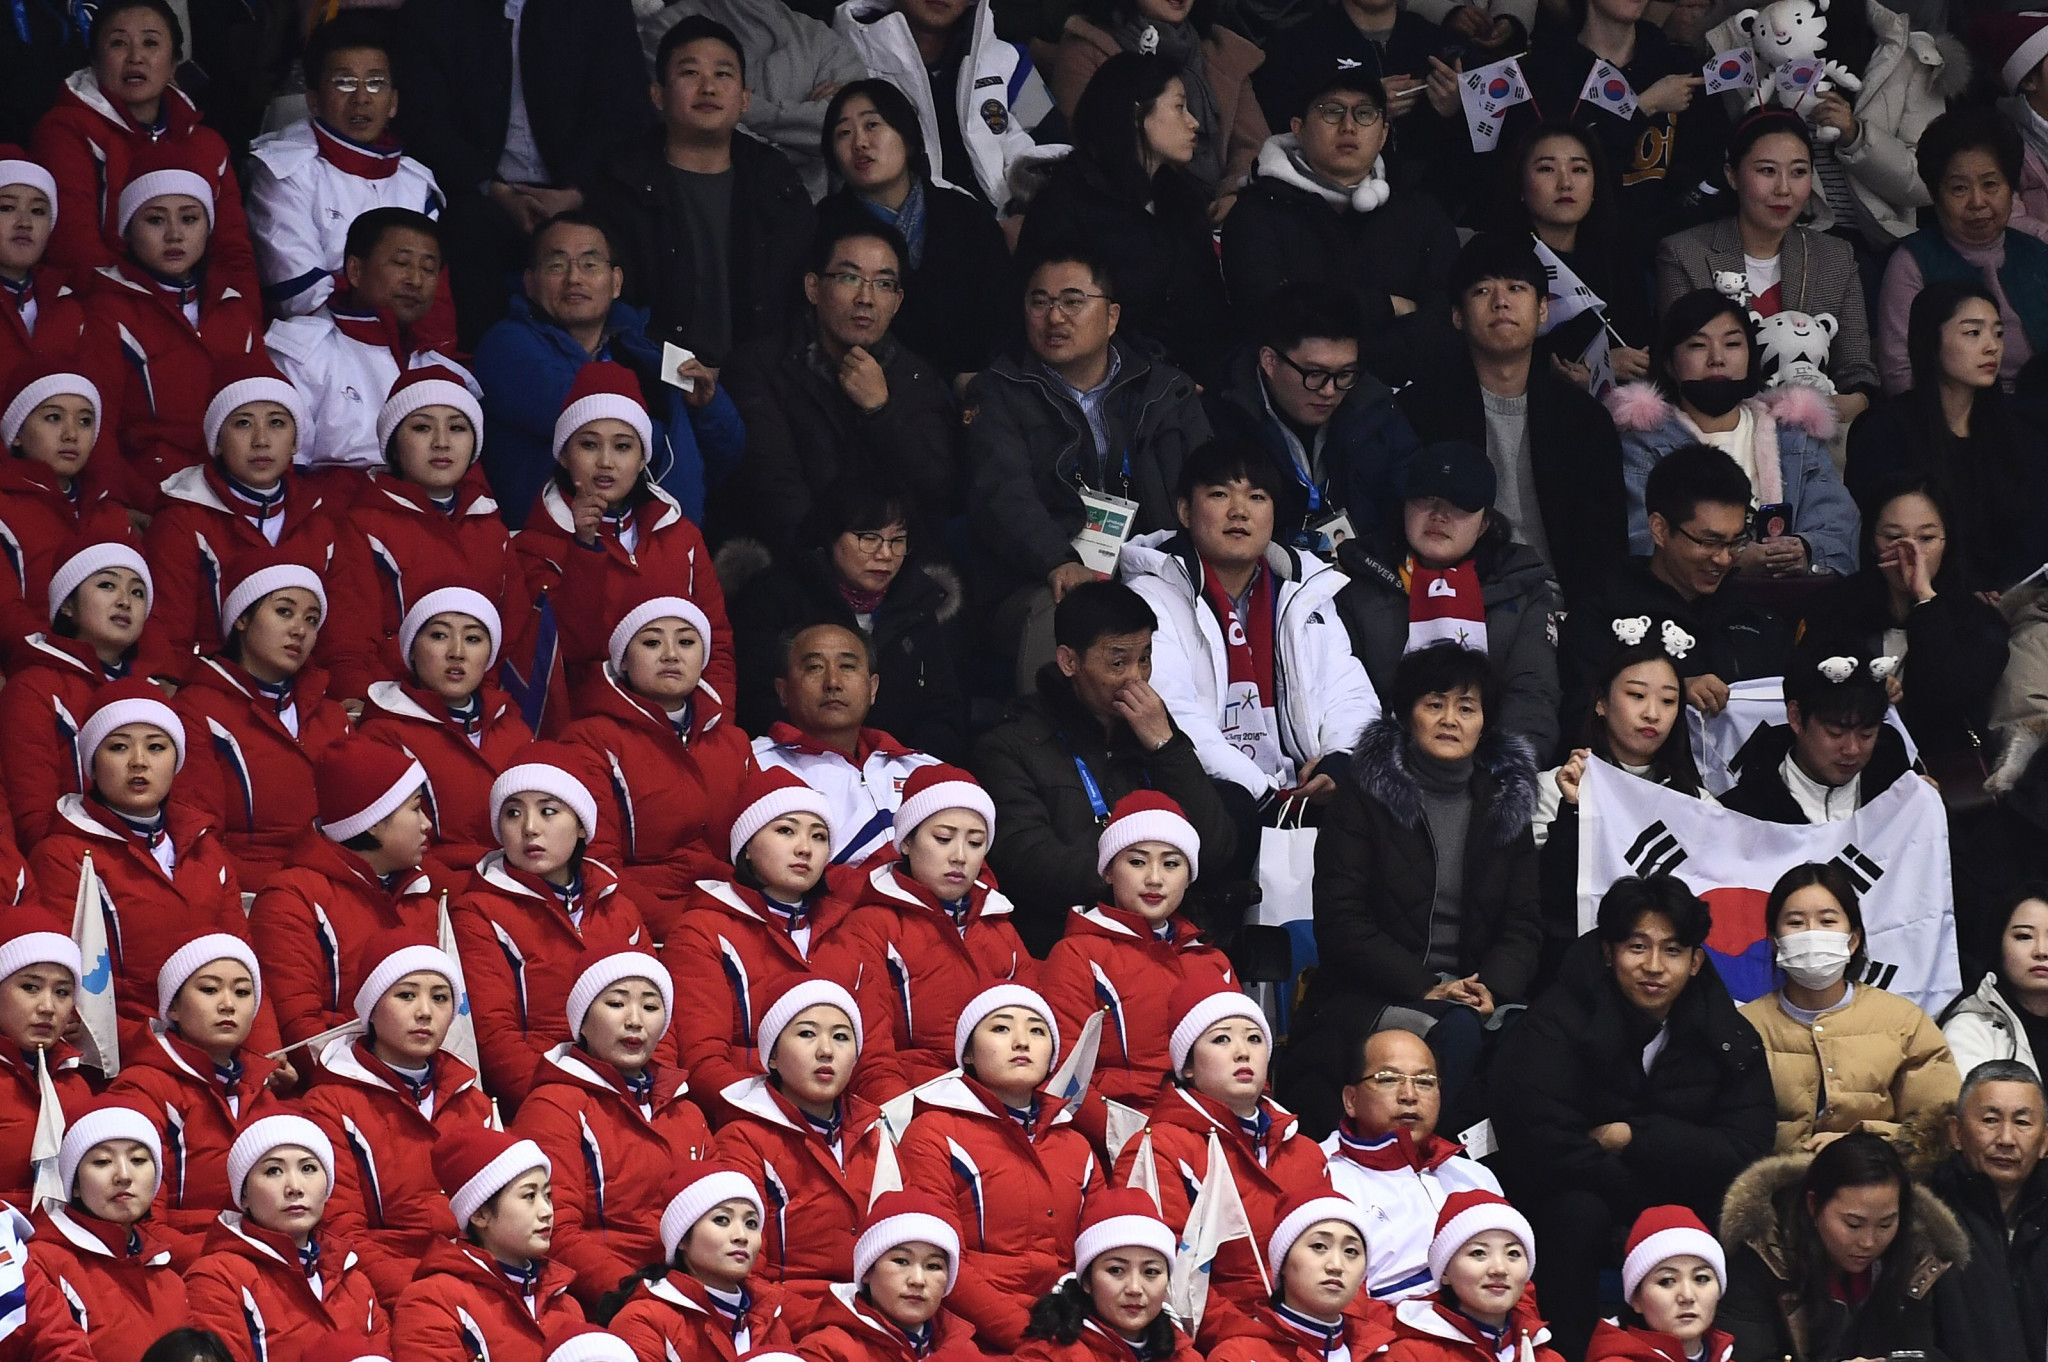 "One Korea Cheering Squad" assembled for Asian Games